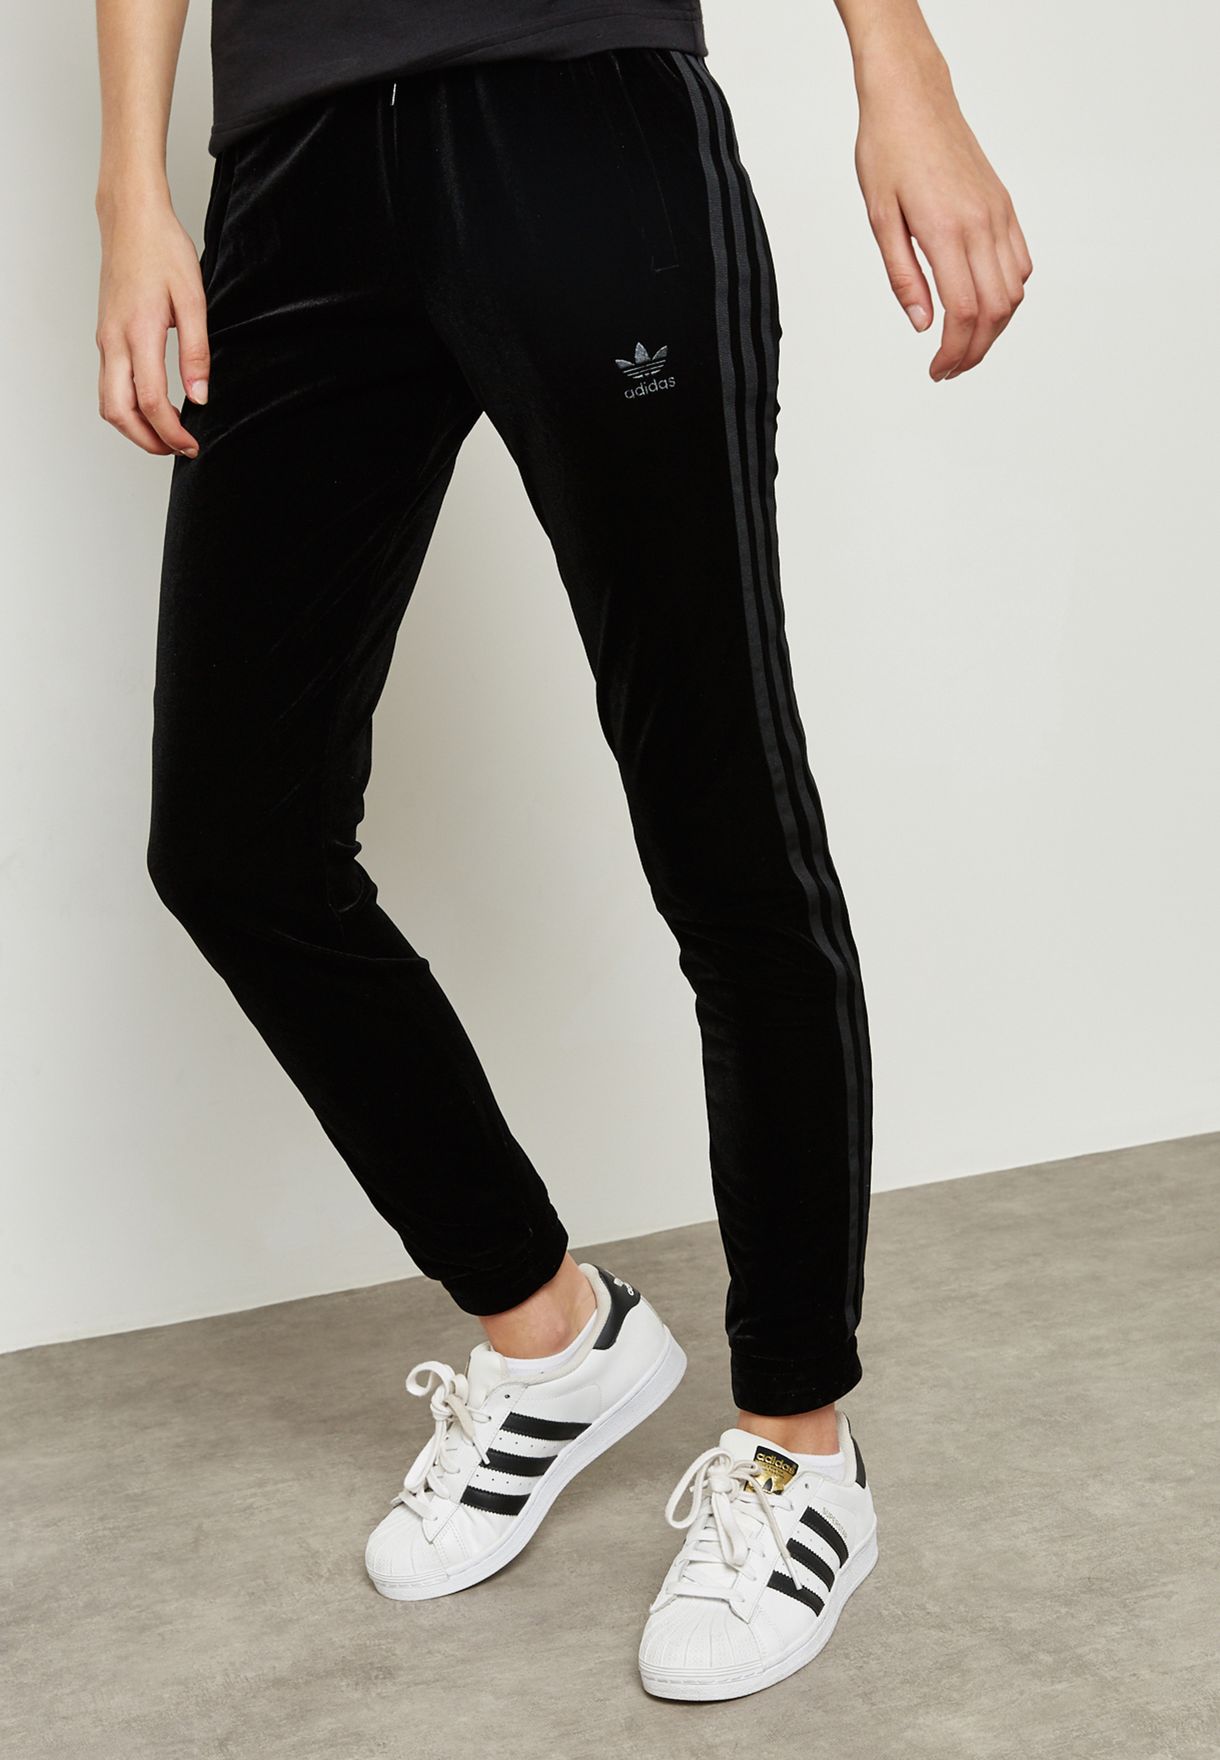 what to wear with black adidas sweatpants